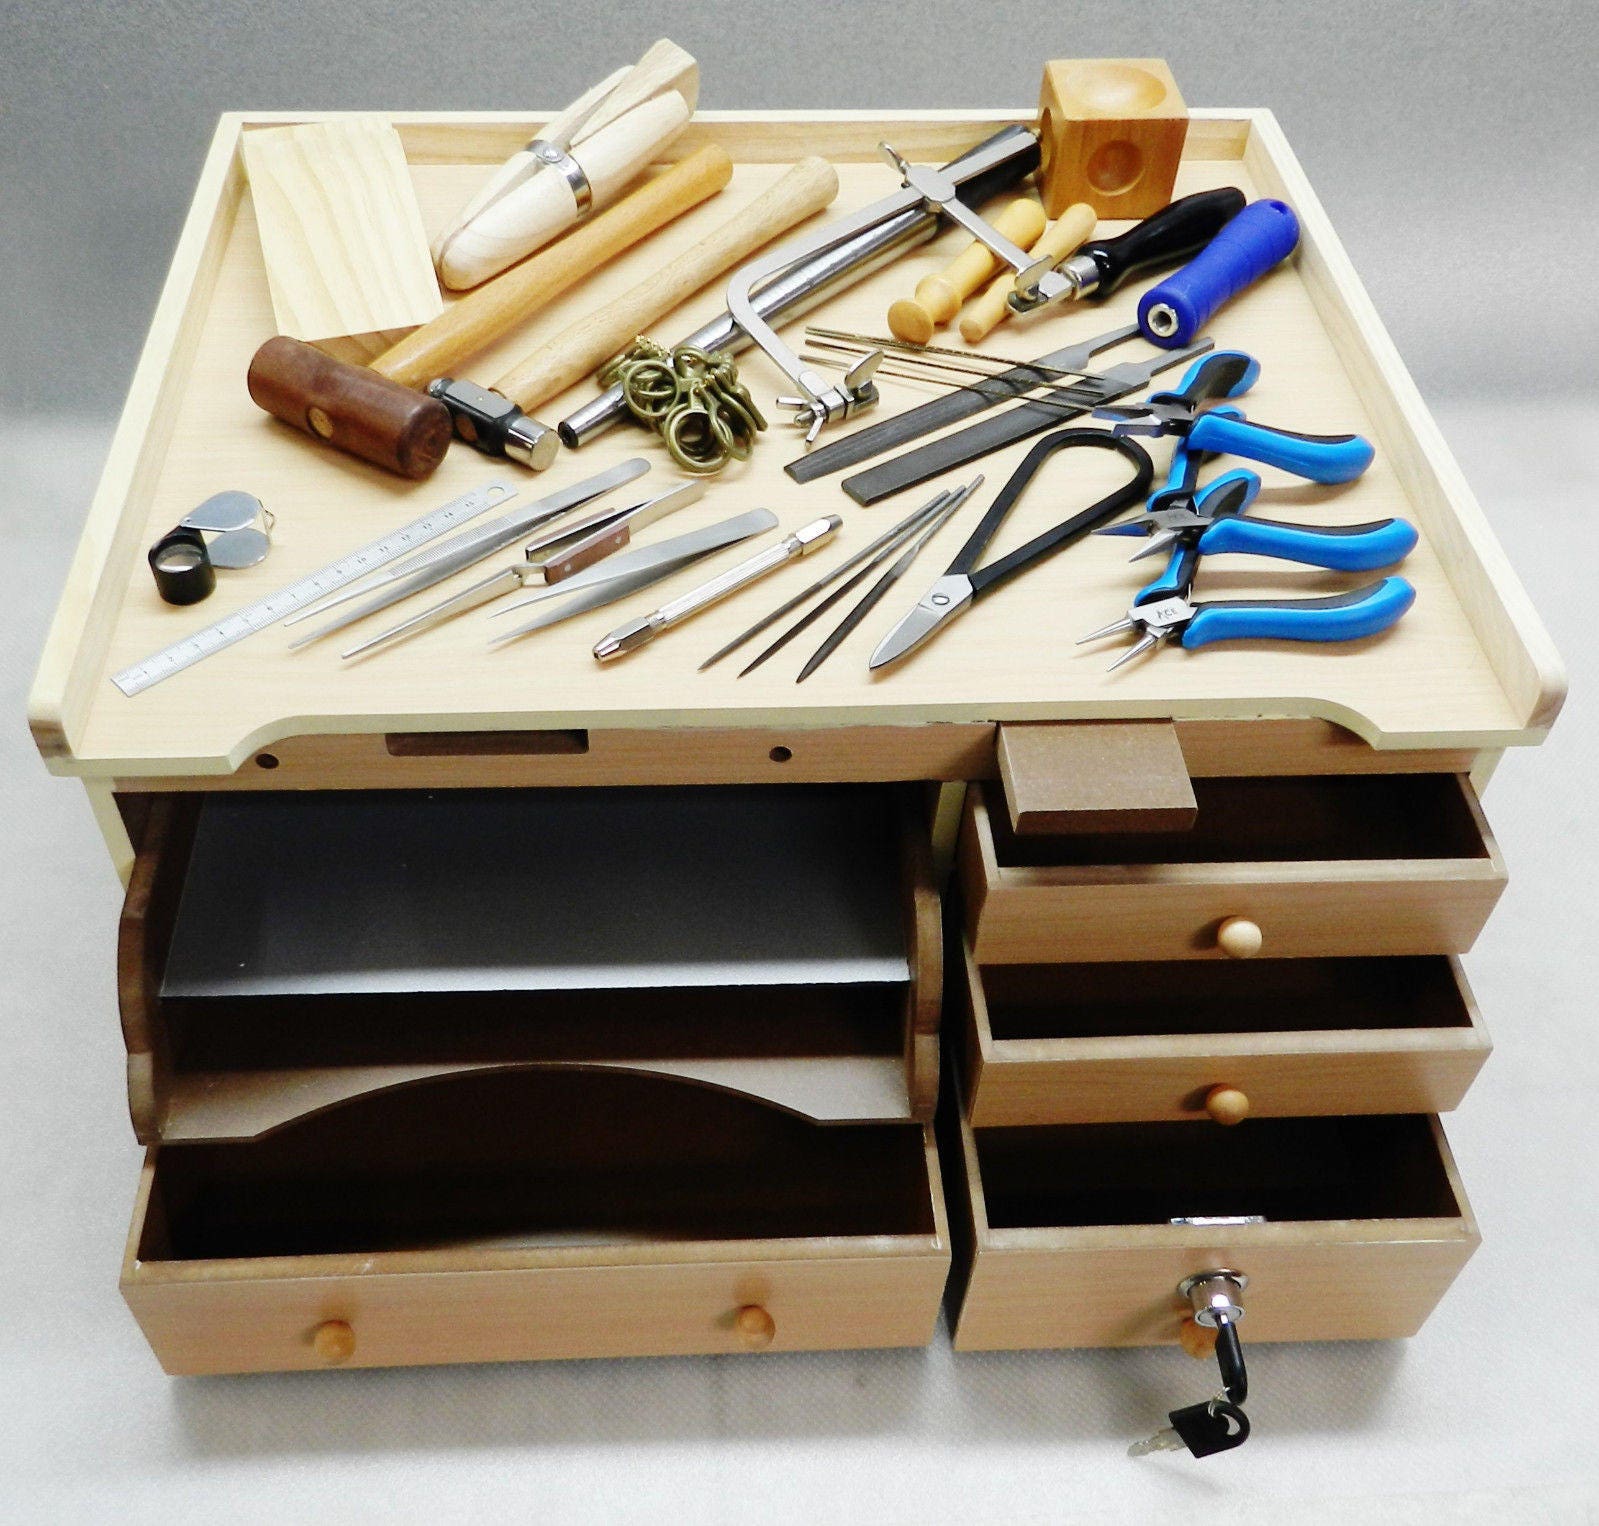 Jewelry Making Tool Kit with Saw Frame, Ring Clamp, Bench Pin, & Blades, KIT-0083